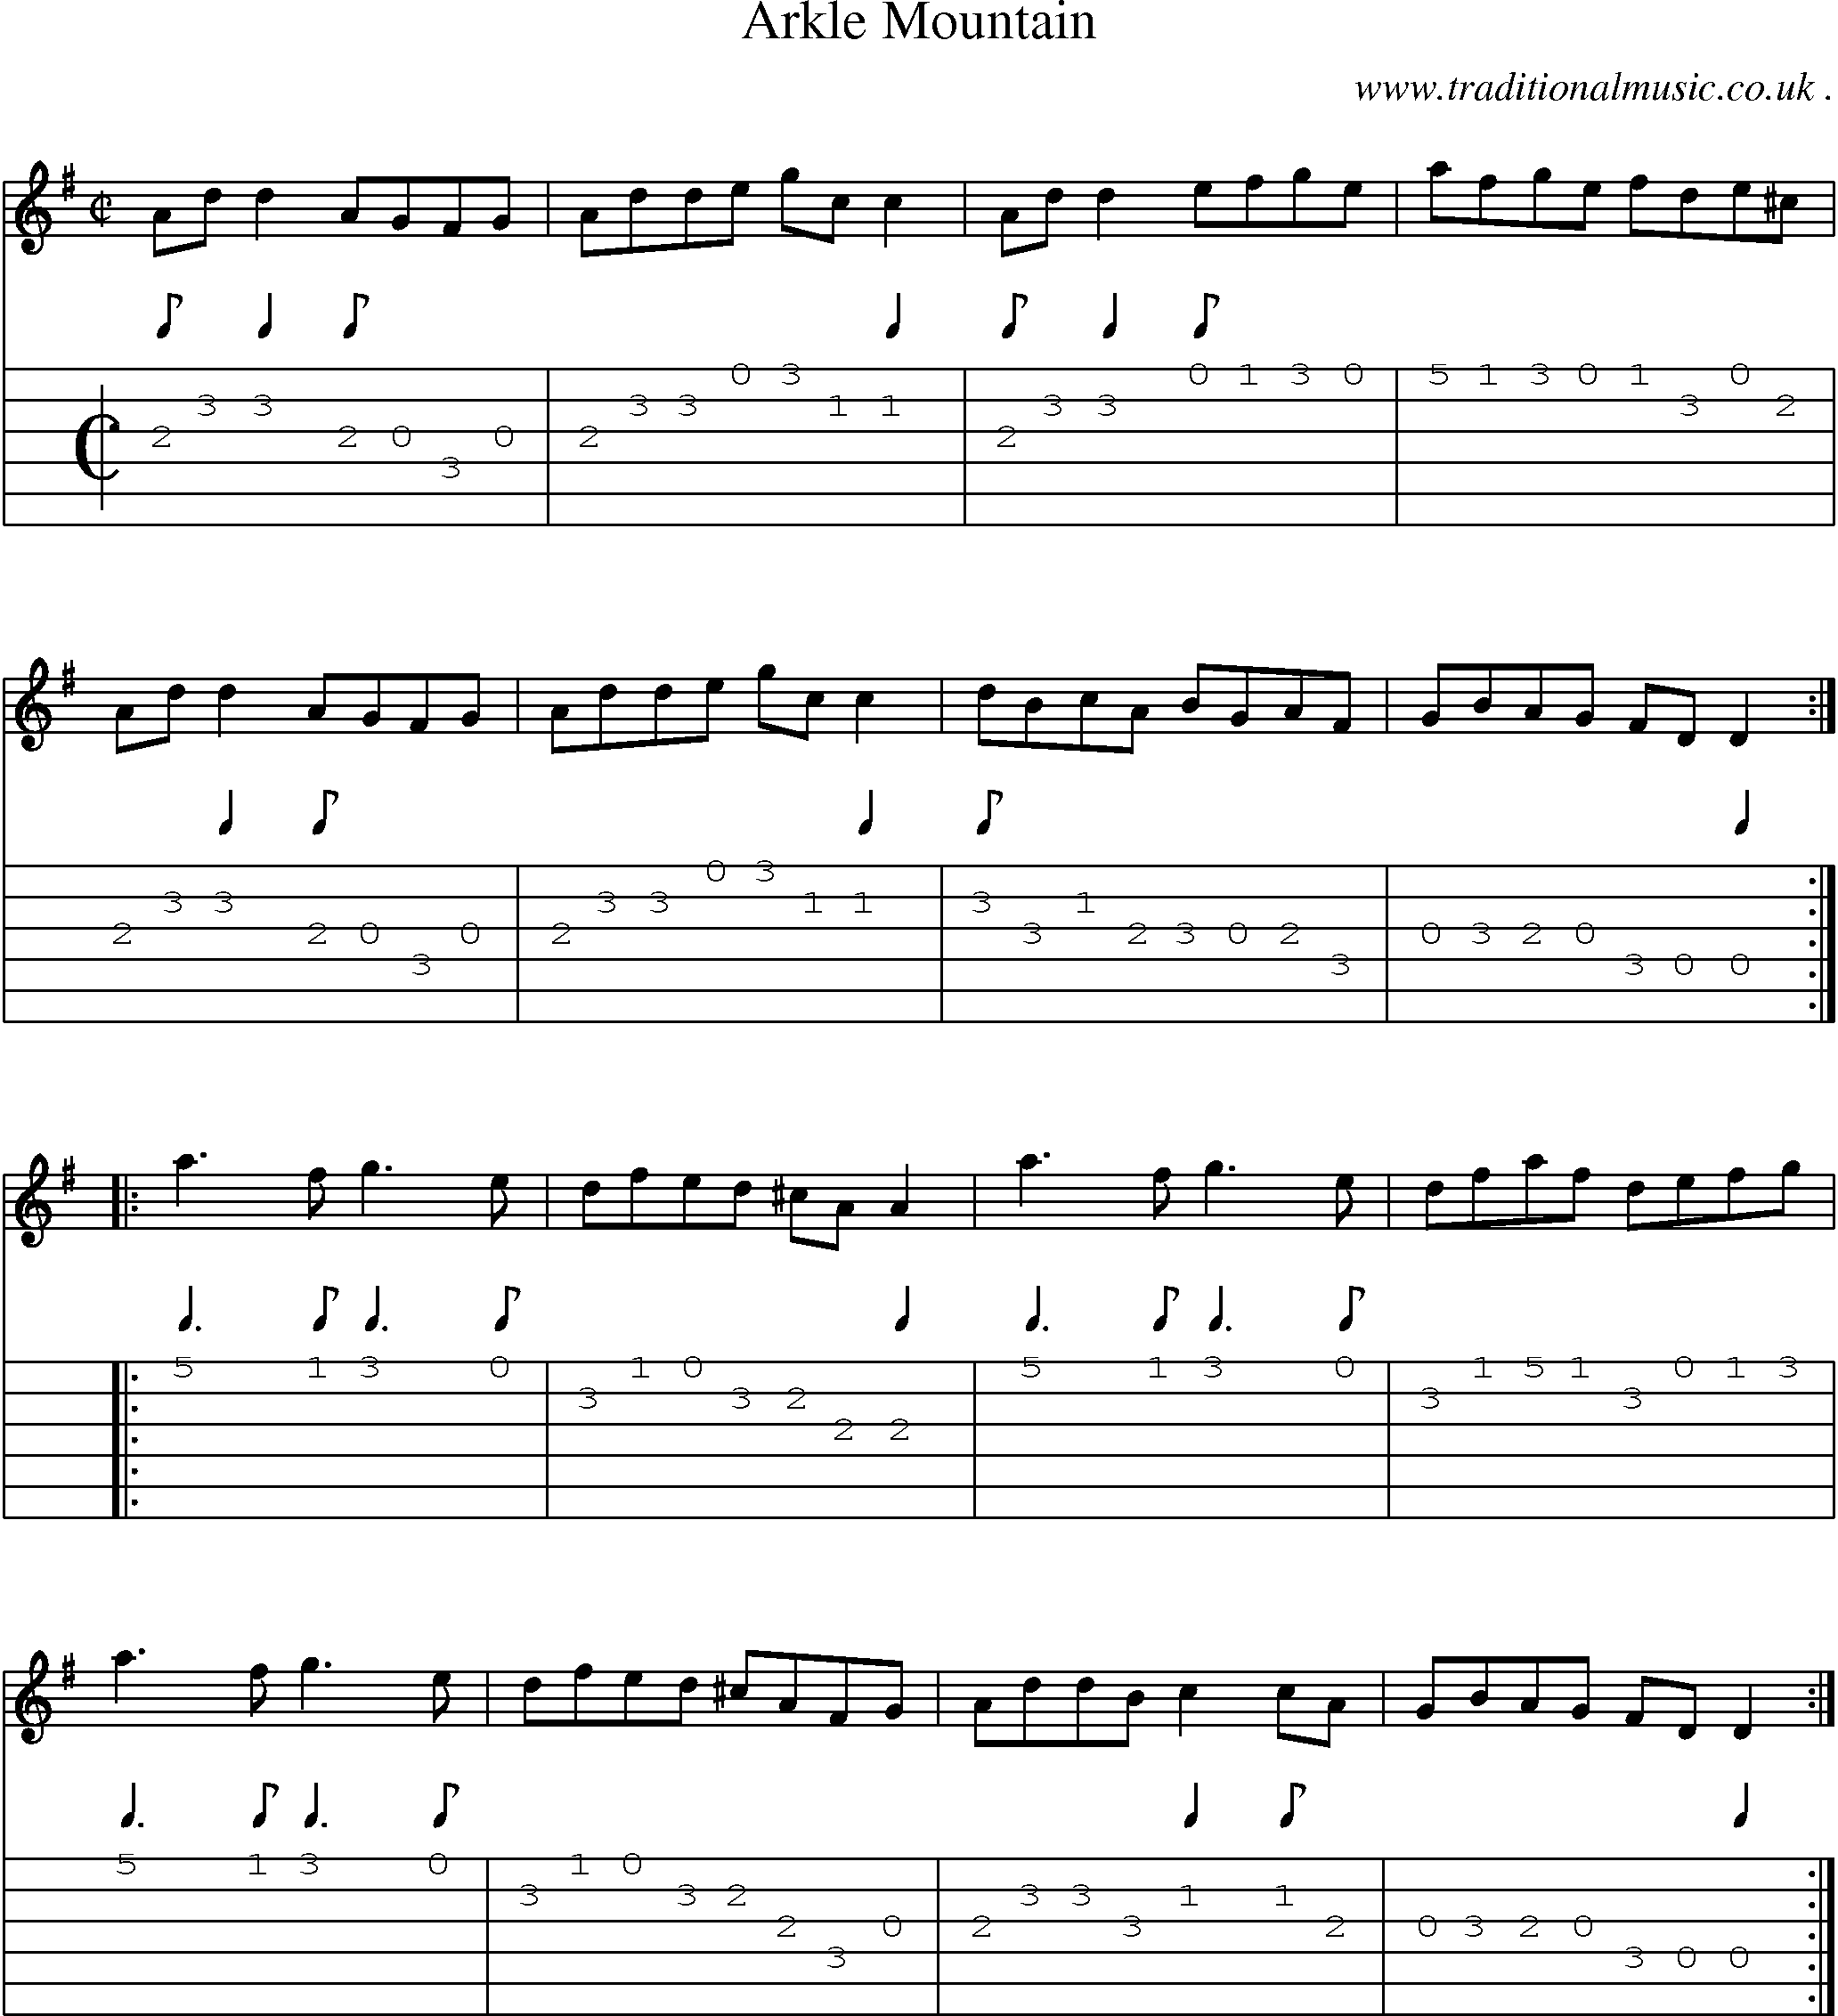 Sheet-Music and Guitar Tabs for Arkle Mountain